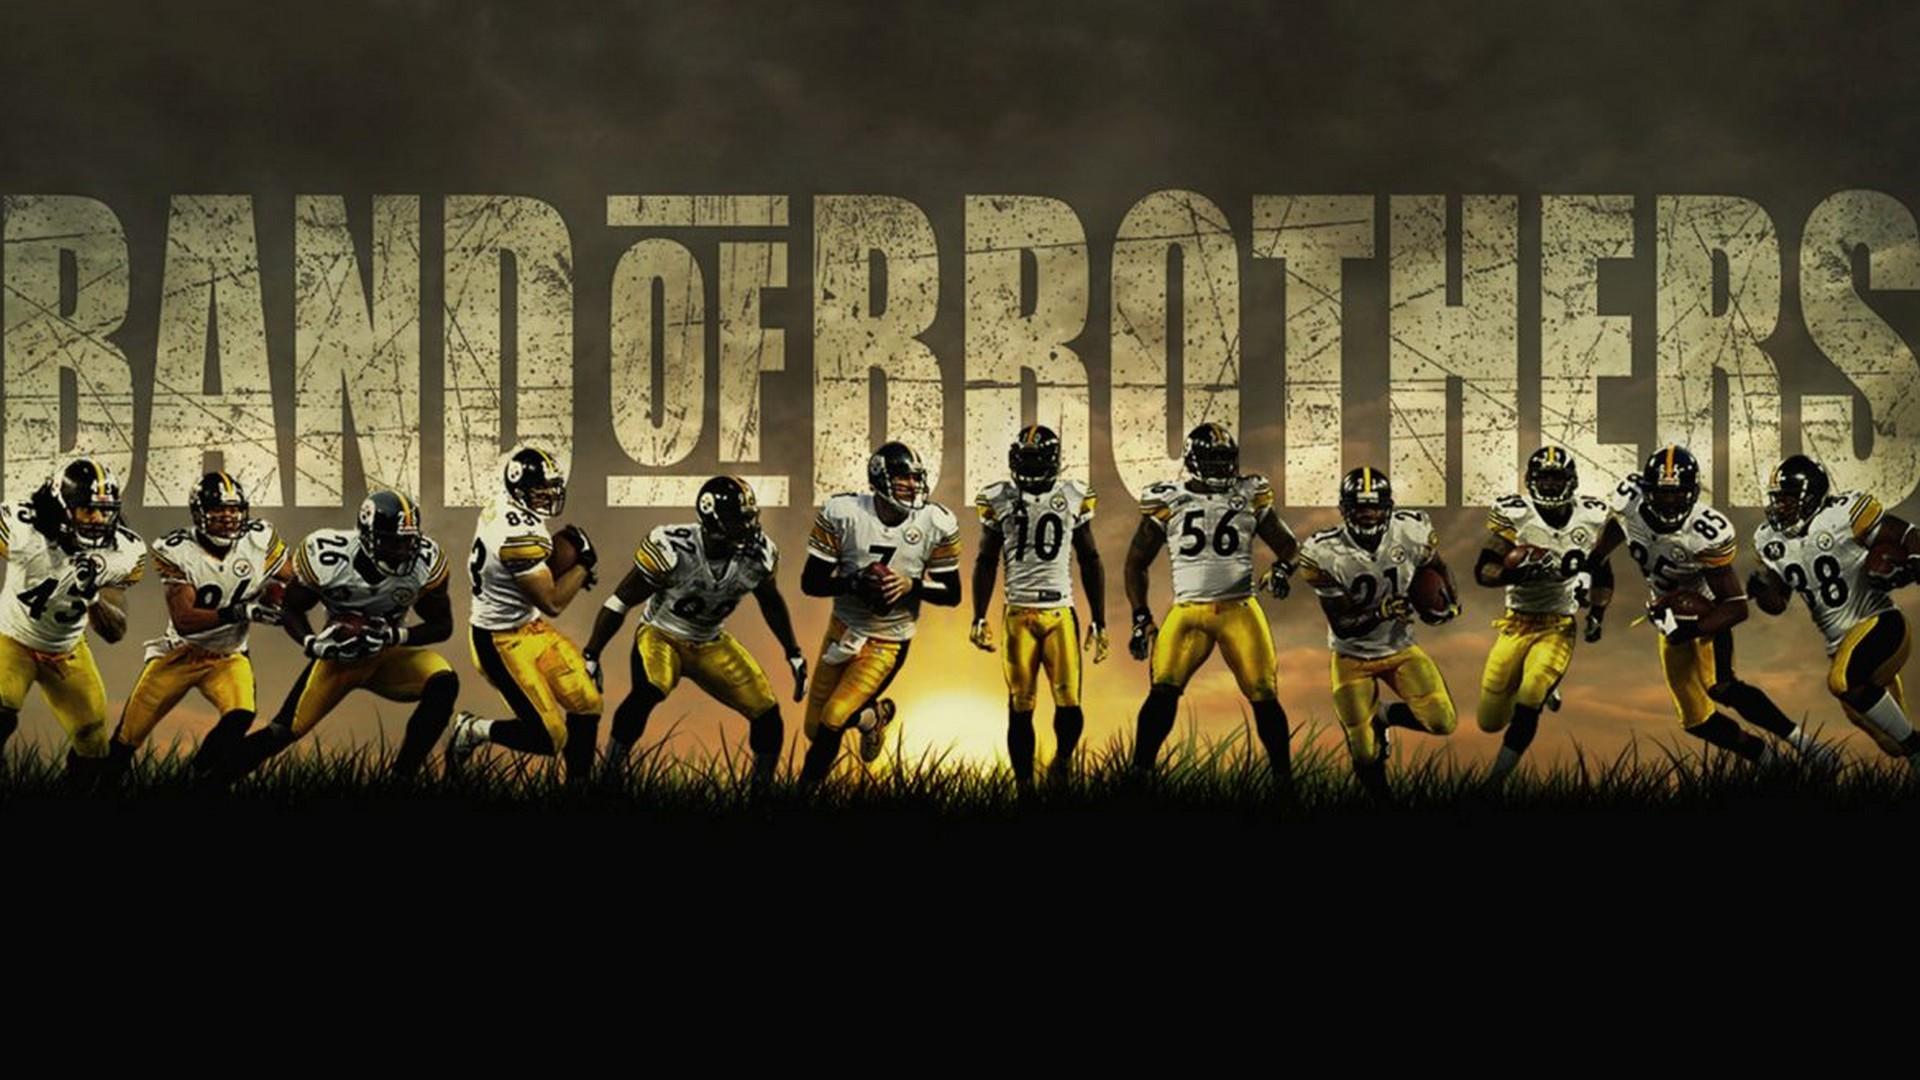 Pittsburgh Steelers Football For PC Wallpaper NFL Football Wallpaper